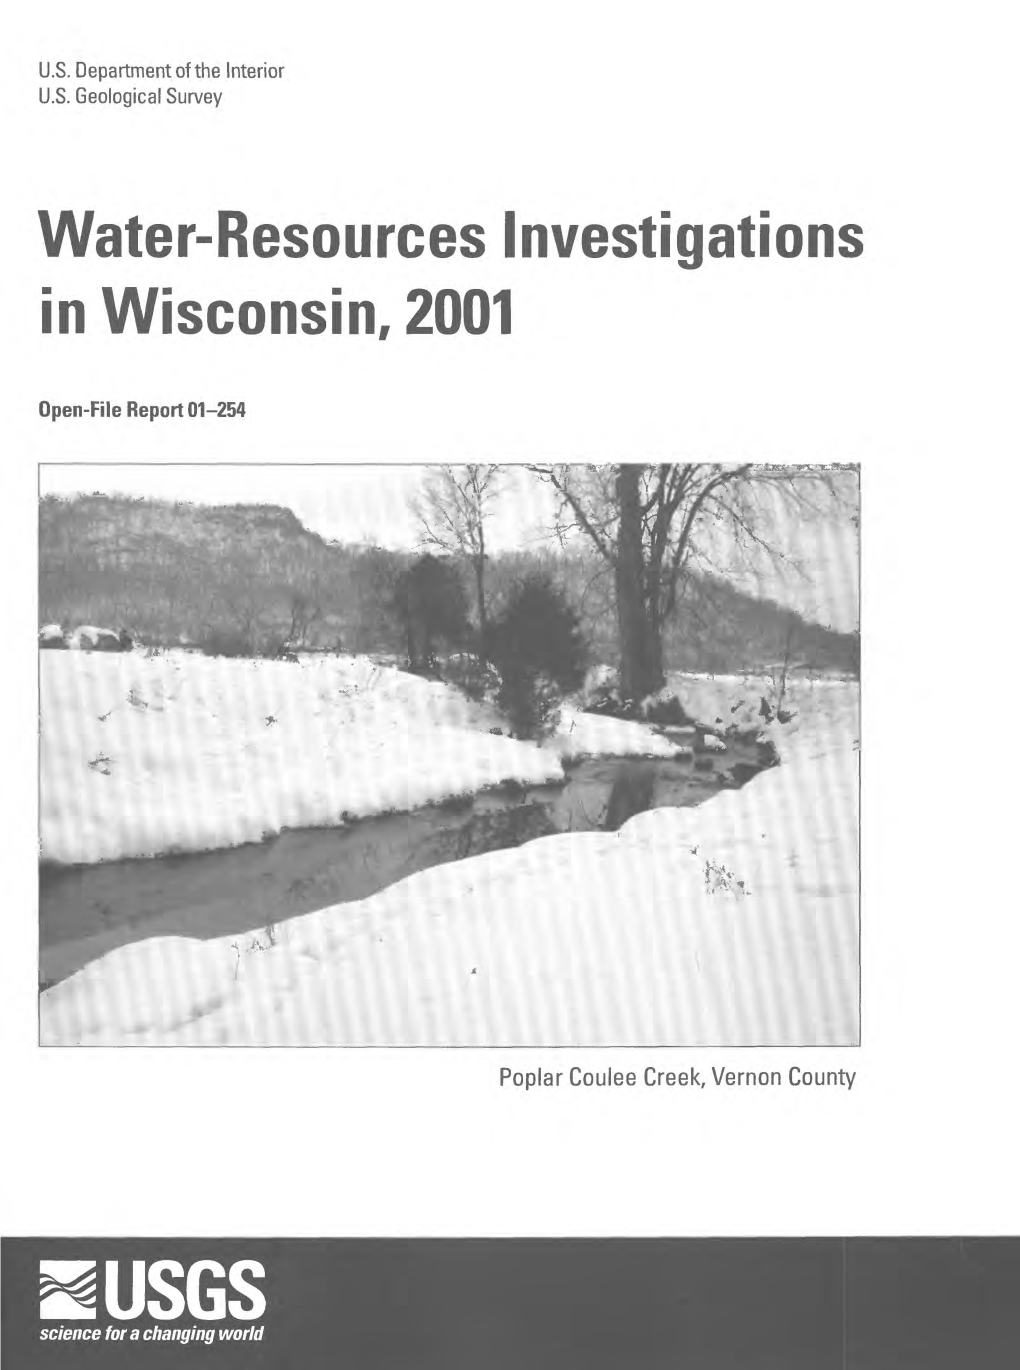 USGS Science for a Changing World WATER-RESOURCES INVESTIGATIONS in WISCONSIN, 2001